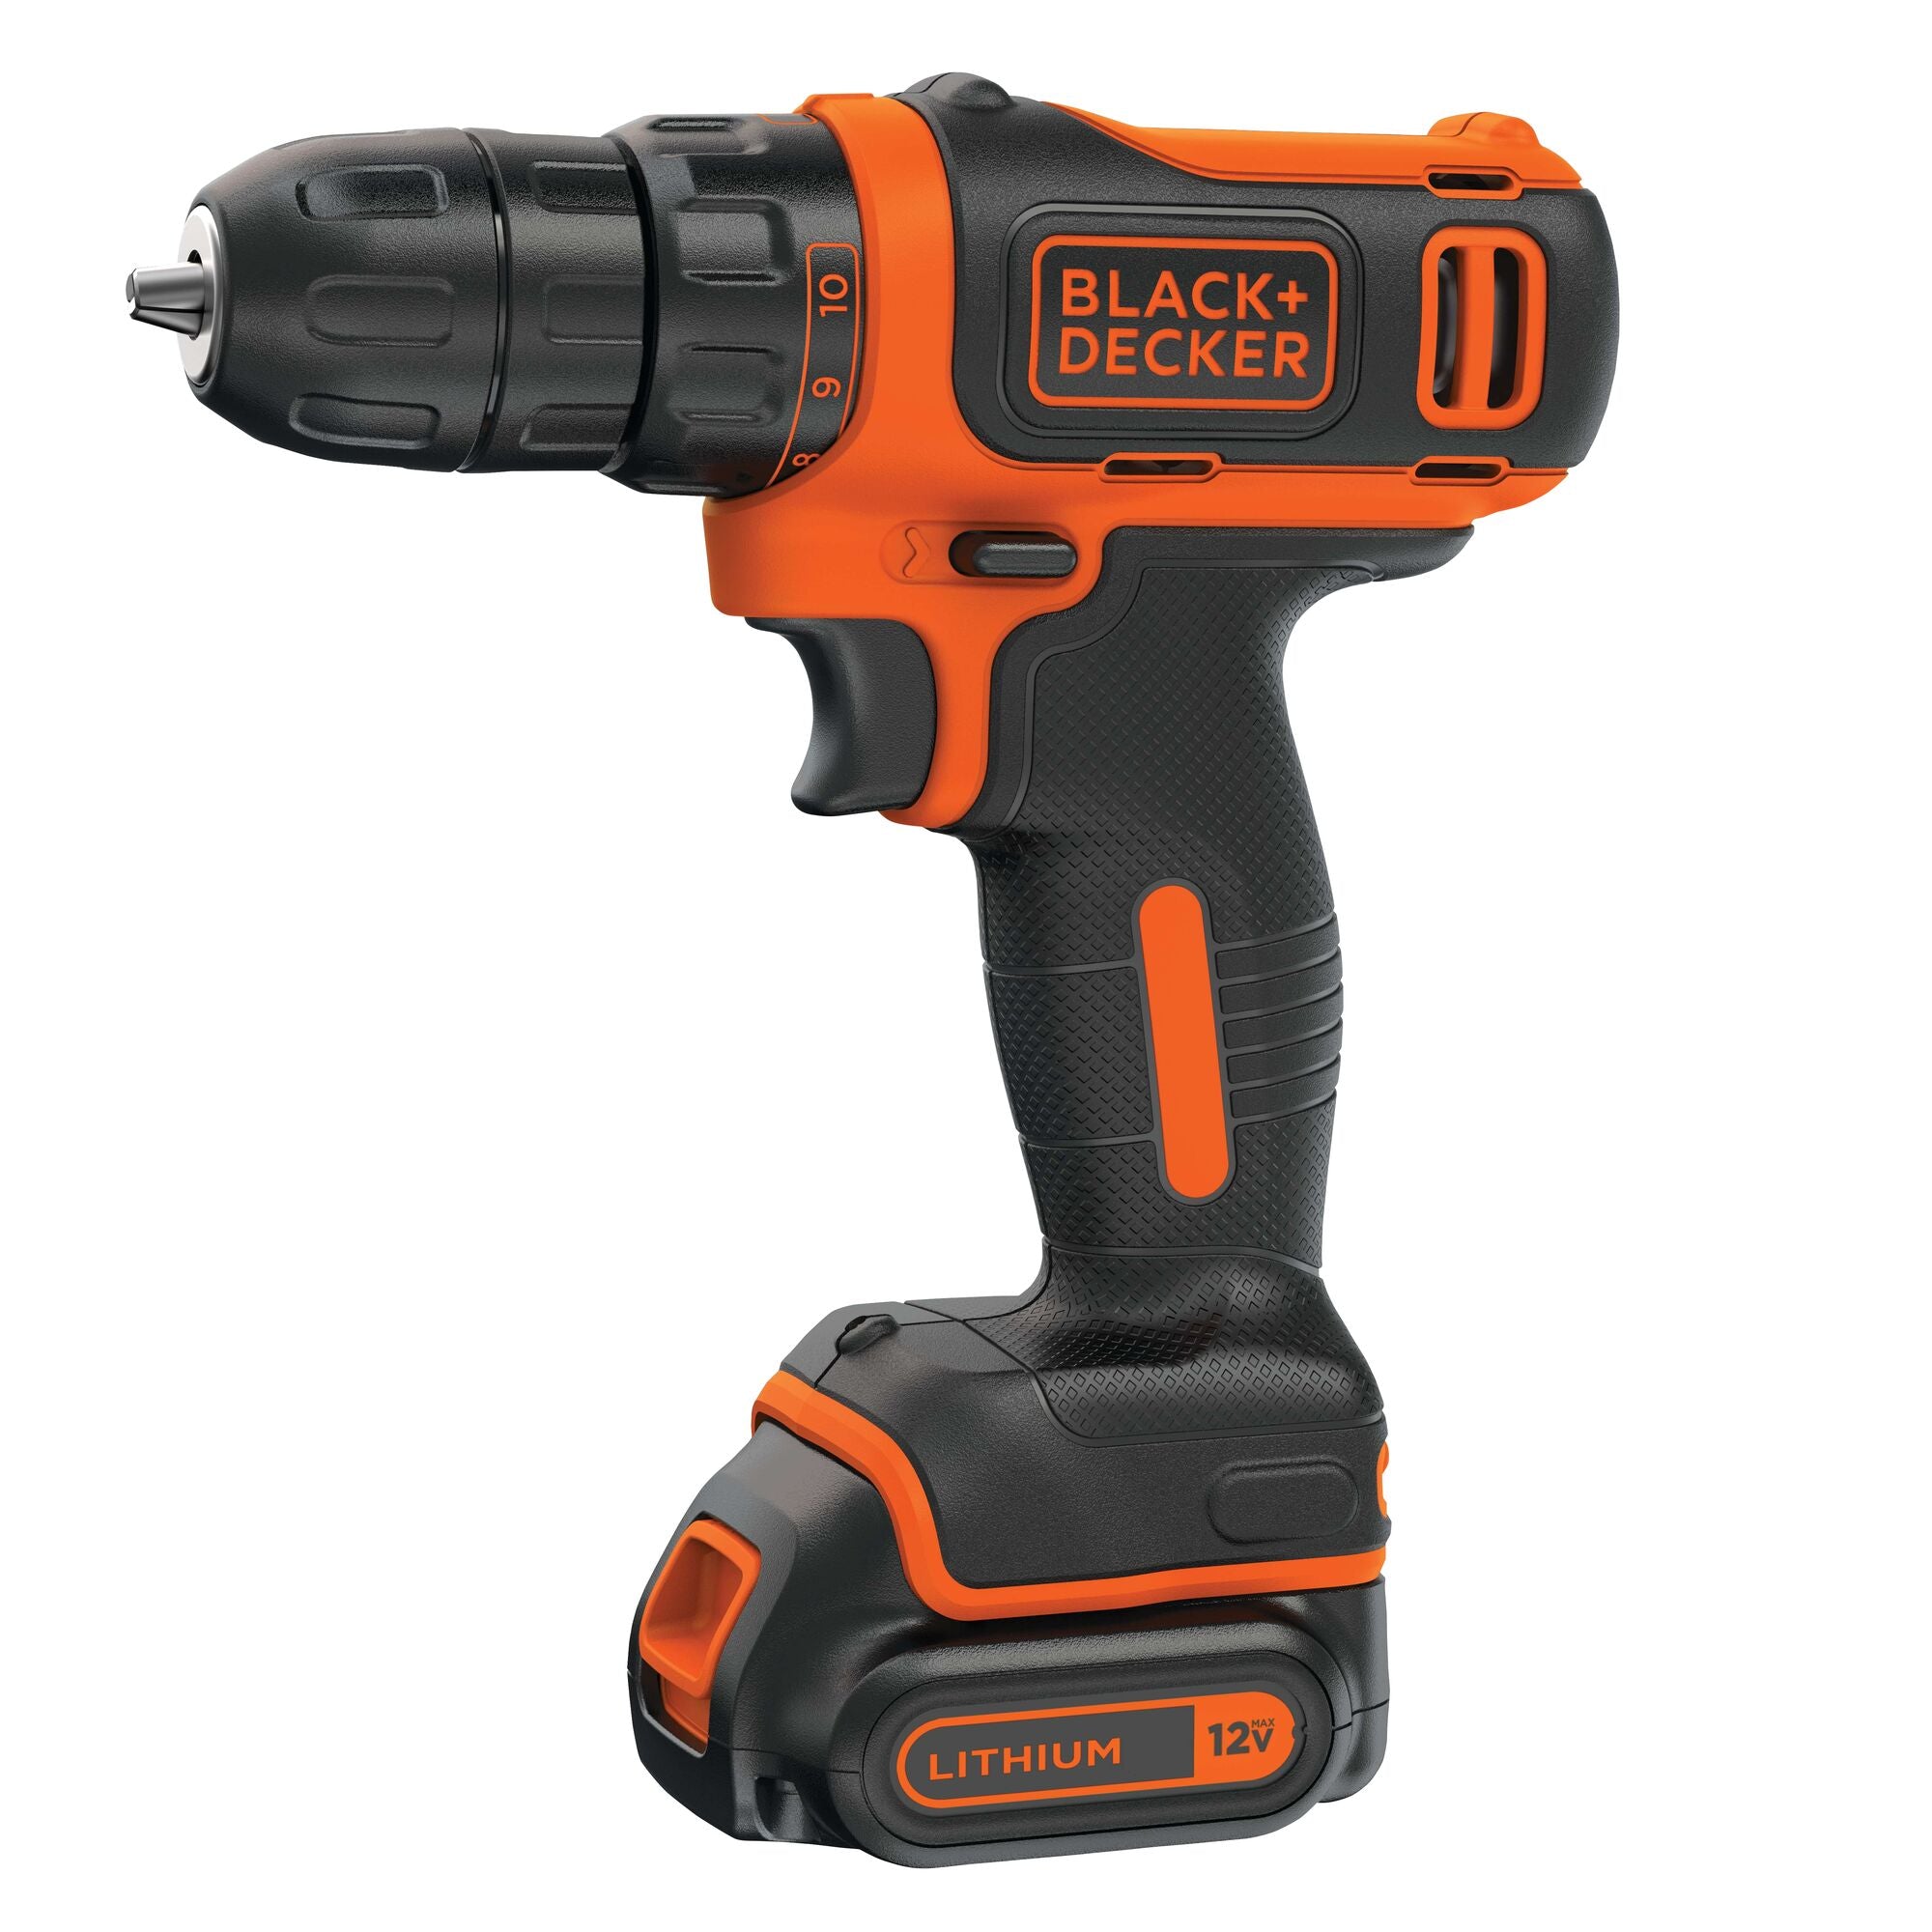 A Man and woman are using the BLACK+DECKER 12V MAX* Drill and Home Tool Kit for repairing furniture.